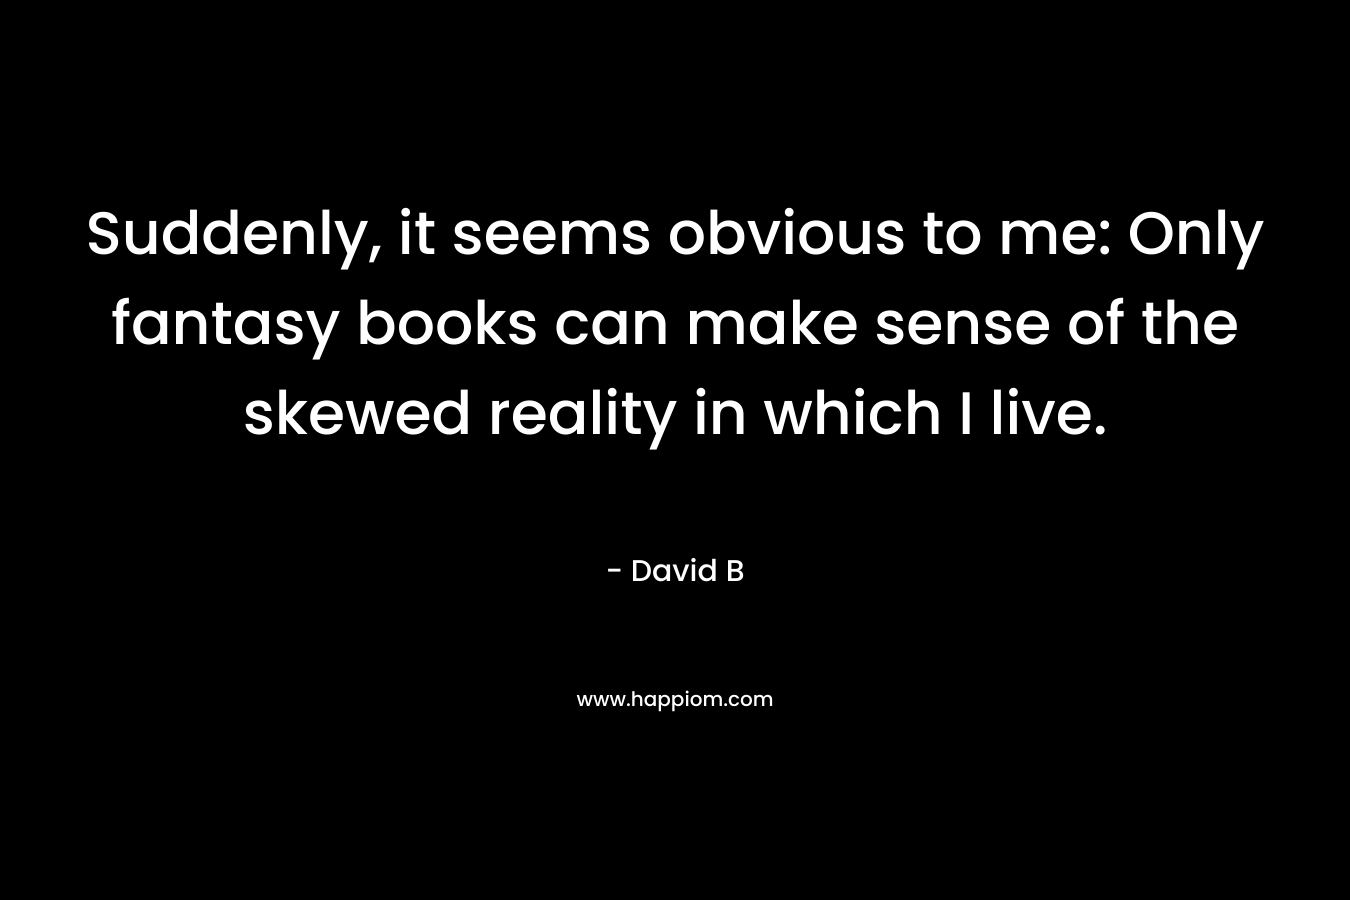 Suddenly, it seems obvious to me: Only fantasy books can make sense of the skewed reality in which I live. – David B